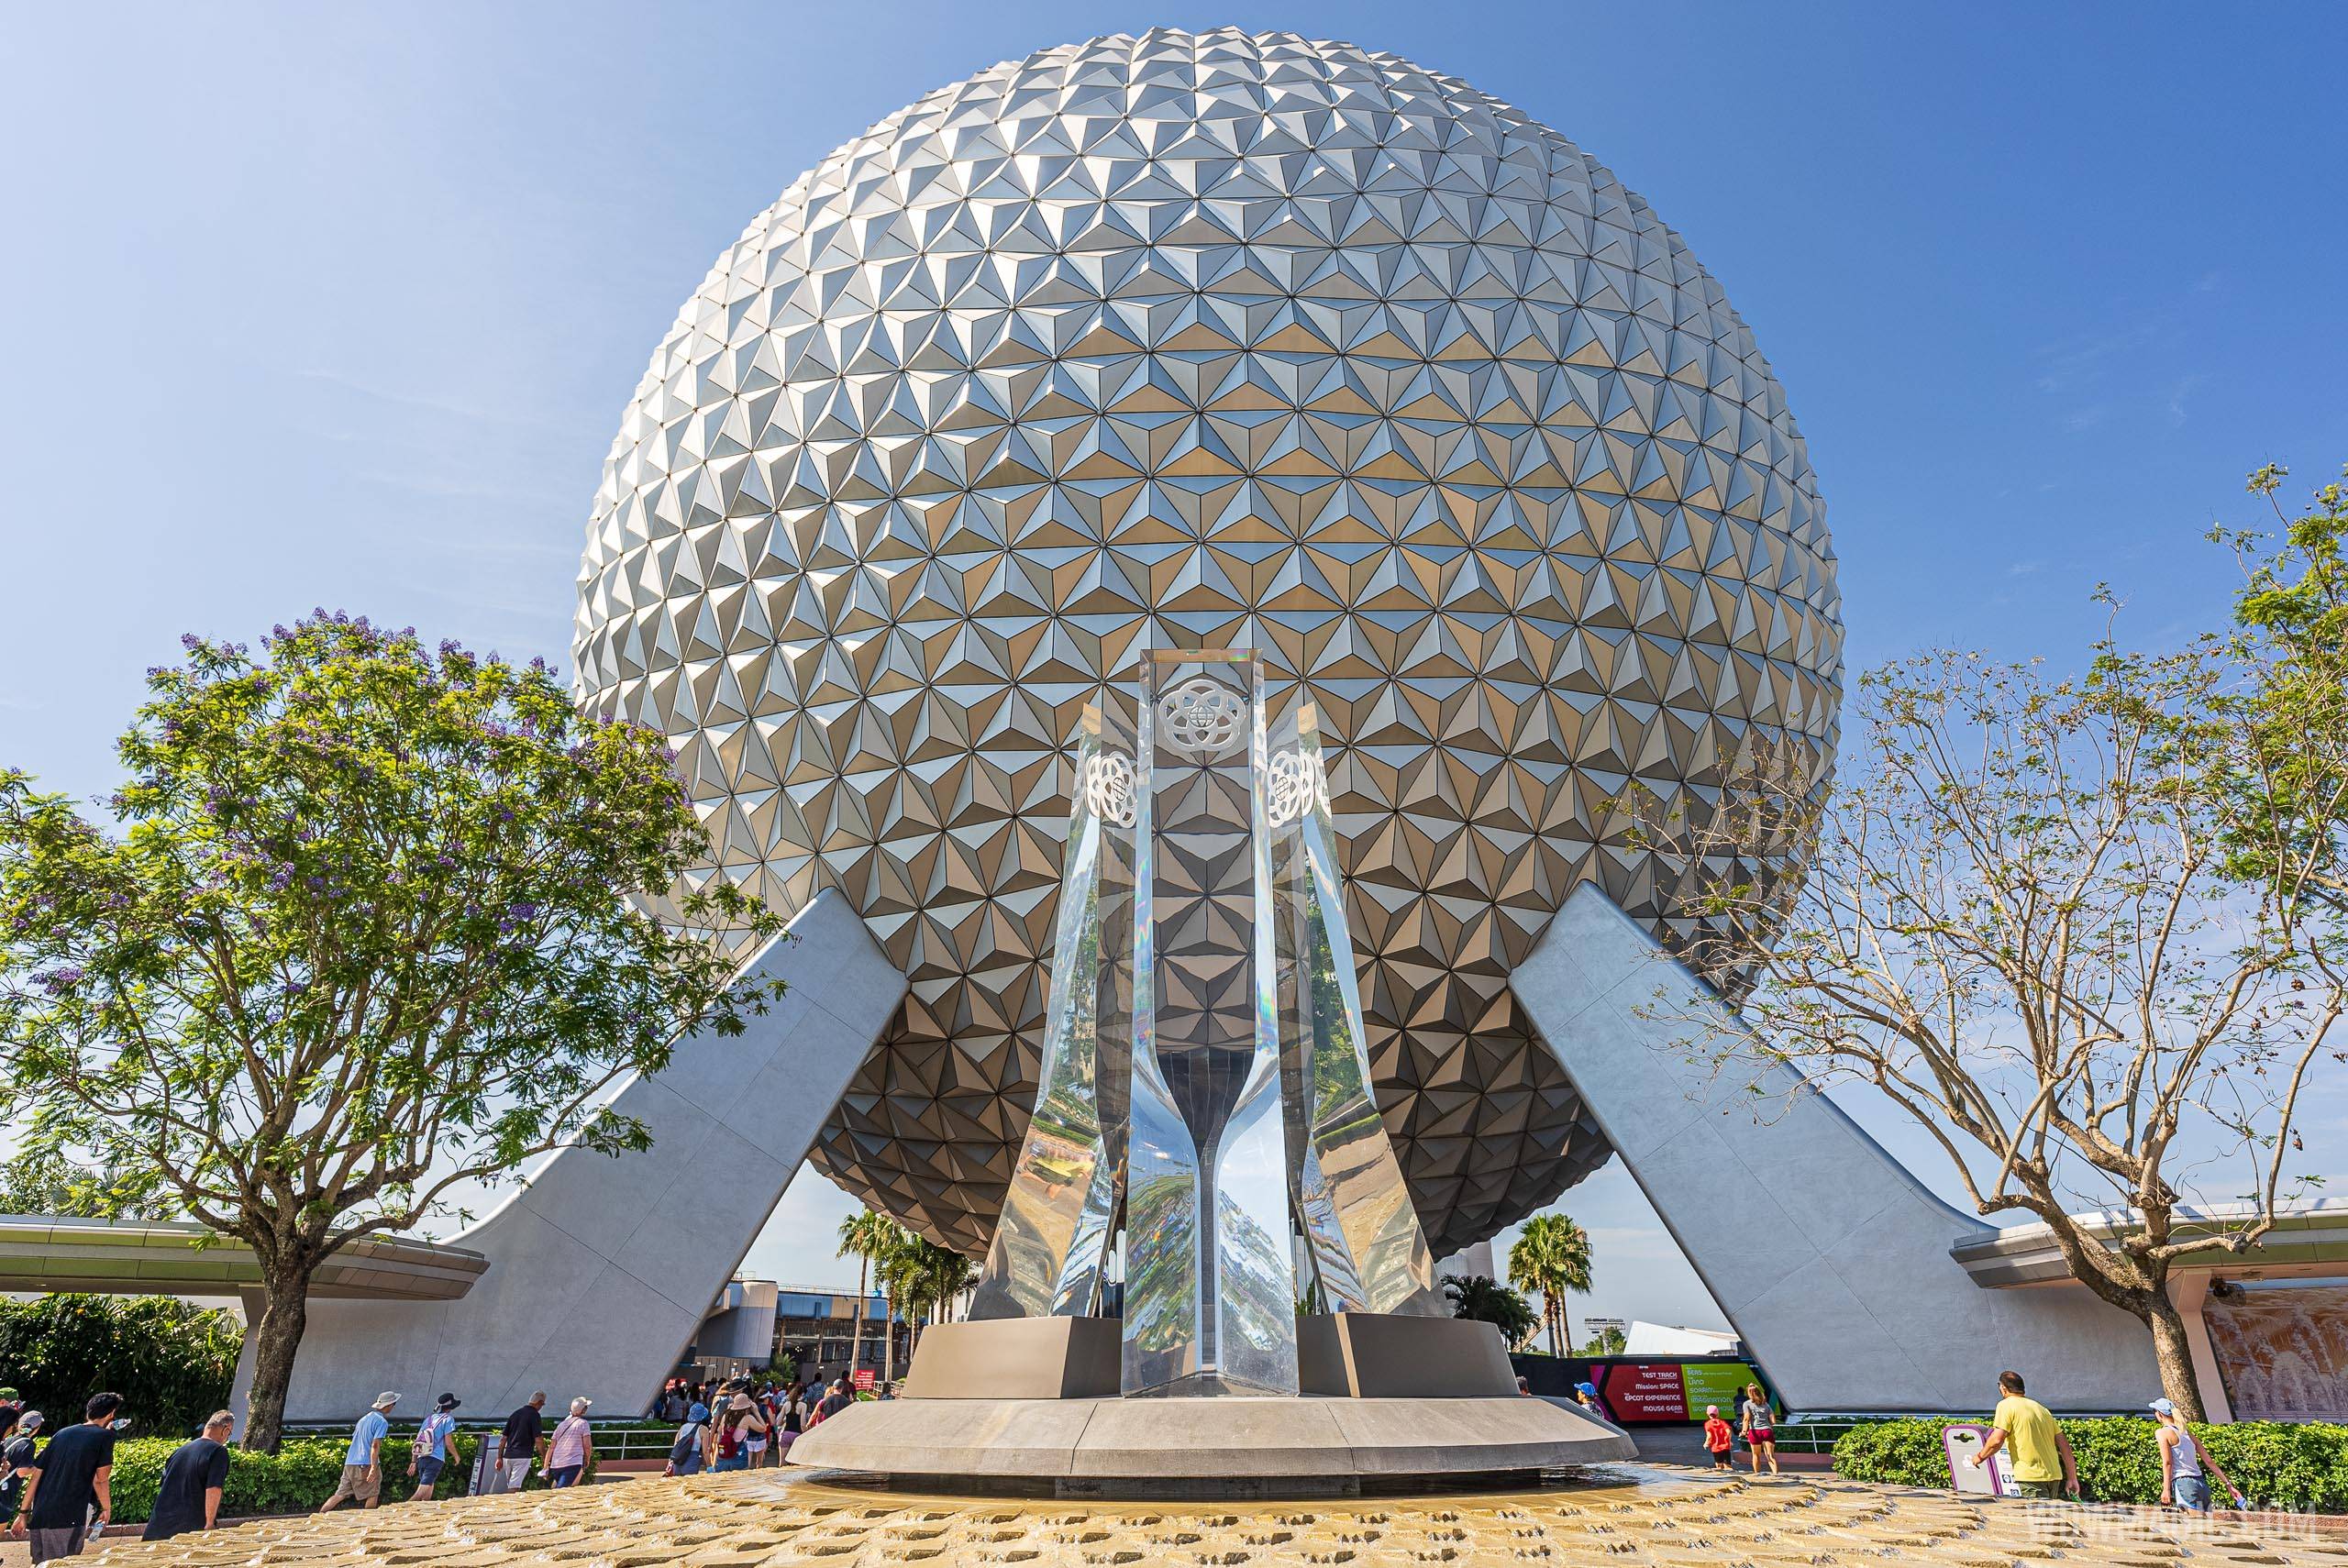 Walt Disney World will see low double digit increases in attendance during June and July